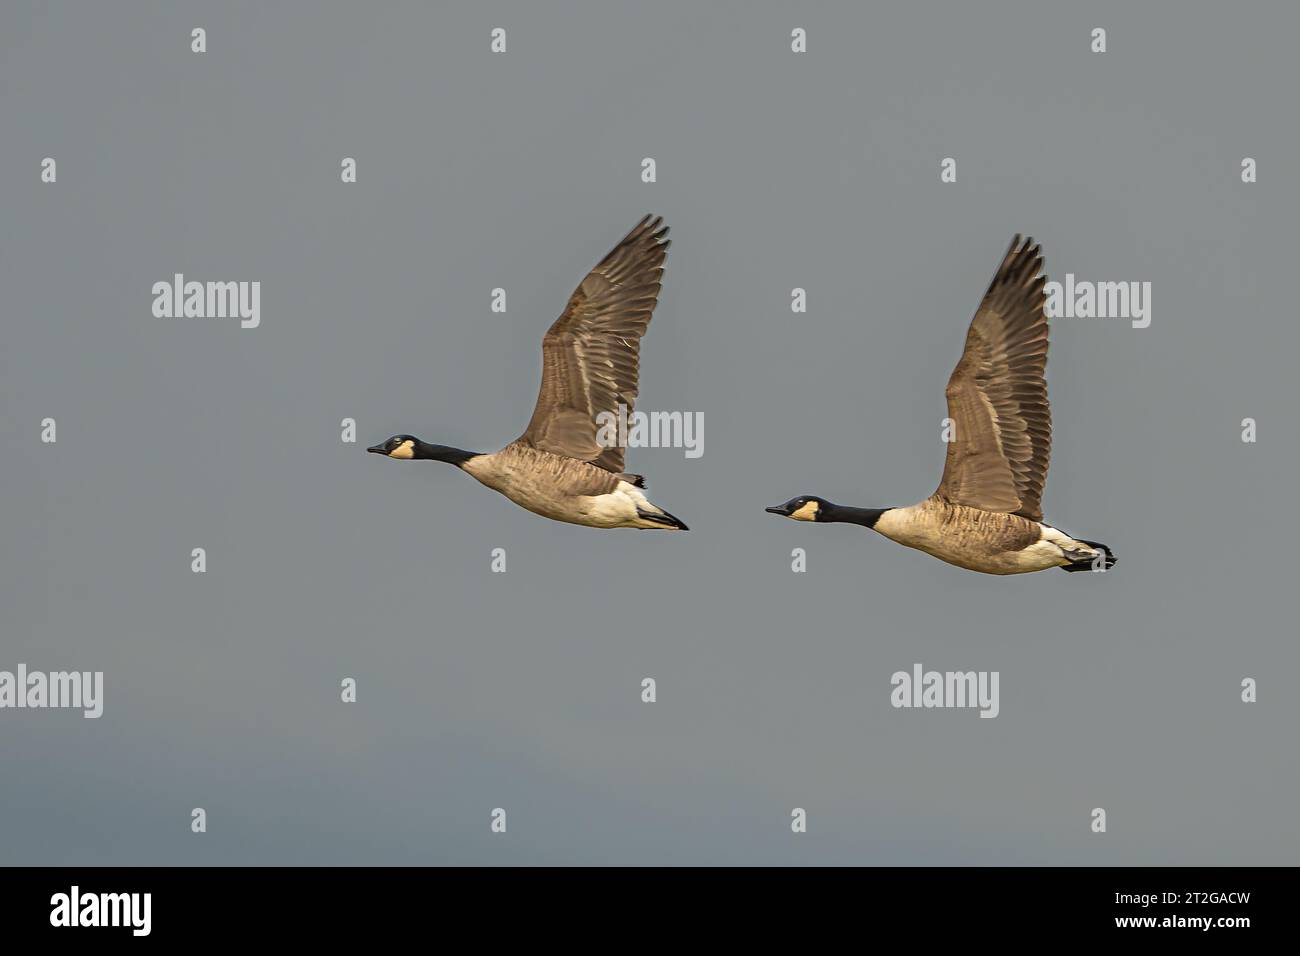 Canadian geese in formation flight over Richmond prak Stock Photo